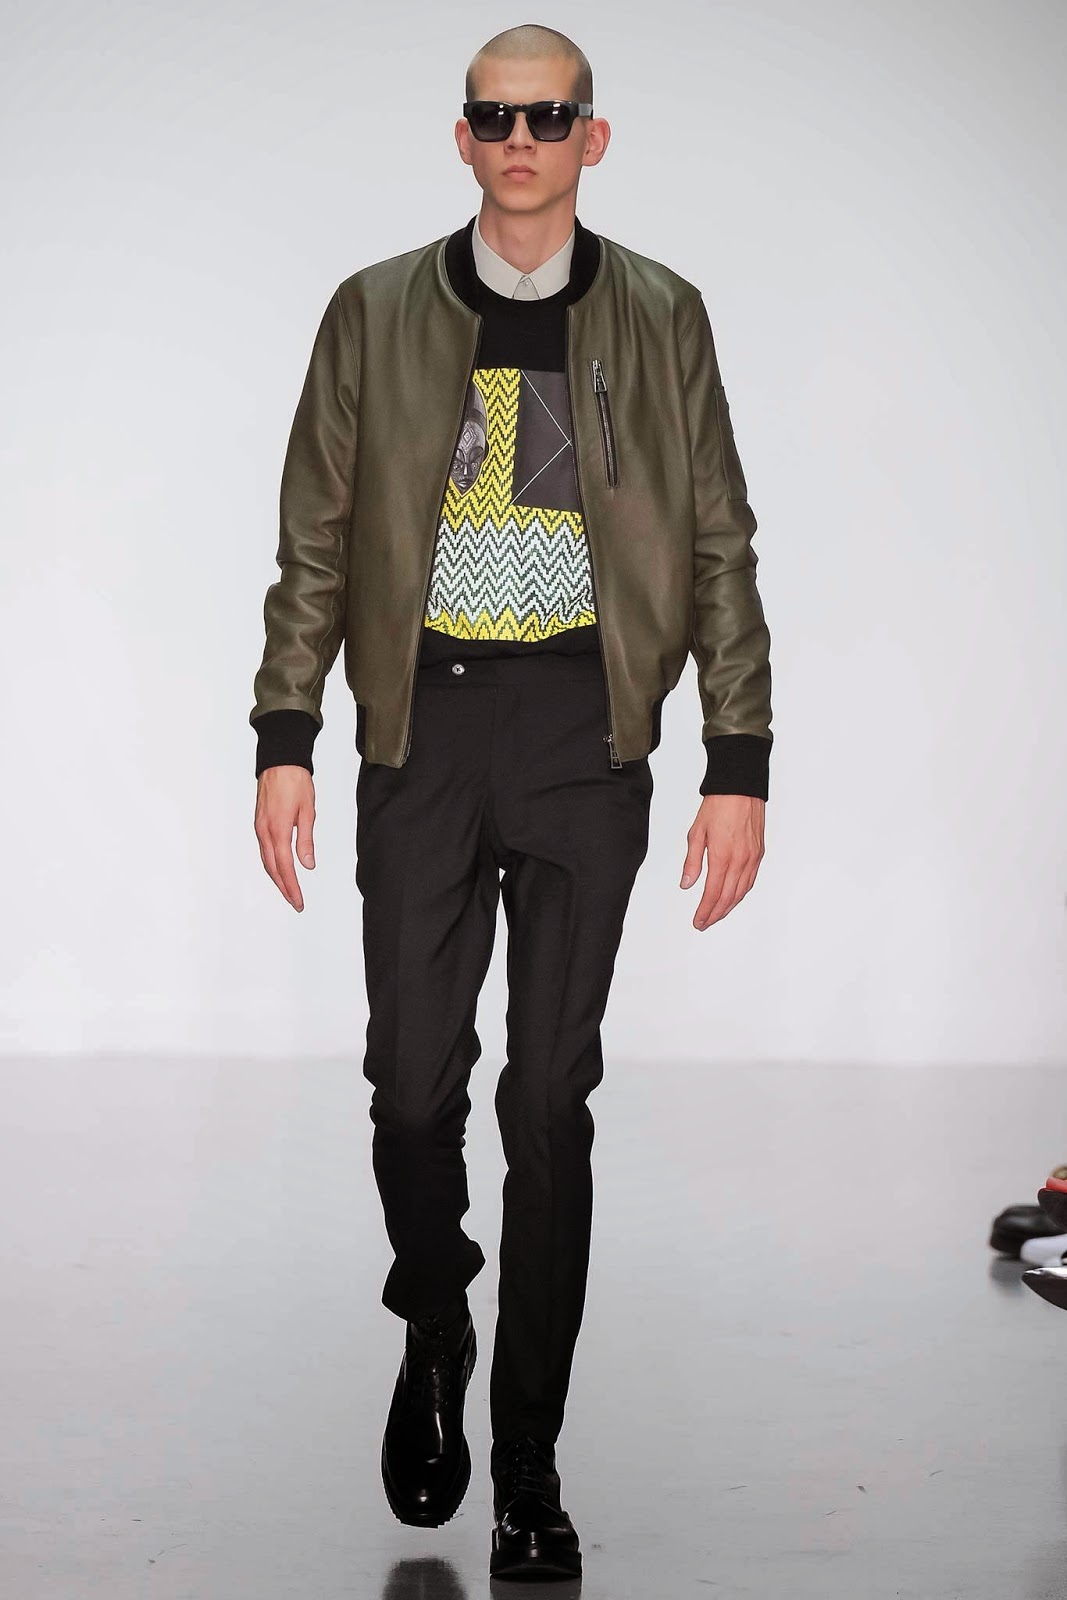 ADRIEN SAUVAGE SPRING 2015 MENS' WEAR COLLECTION. | AFROTHREADS